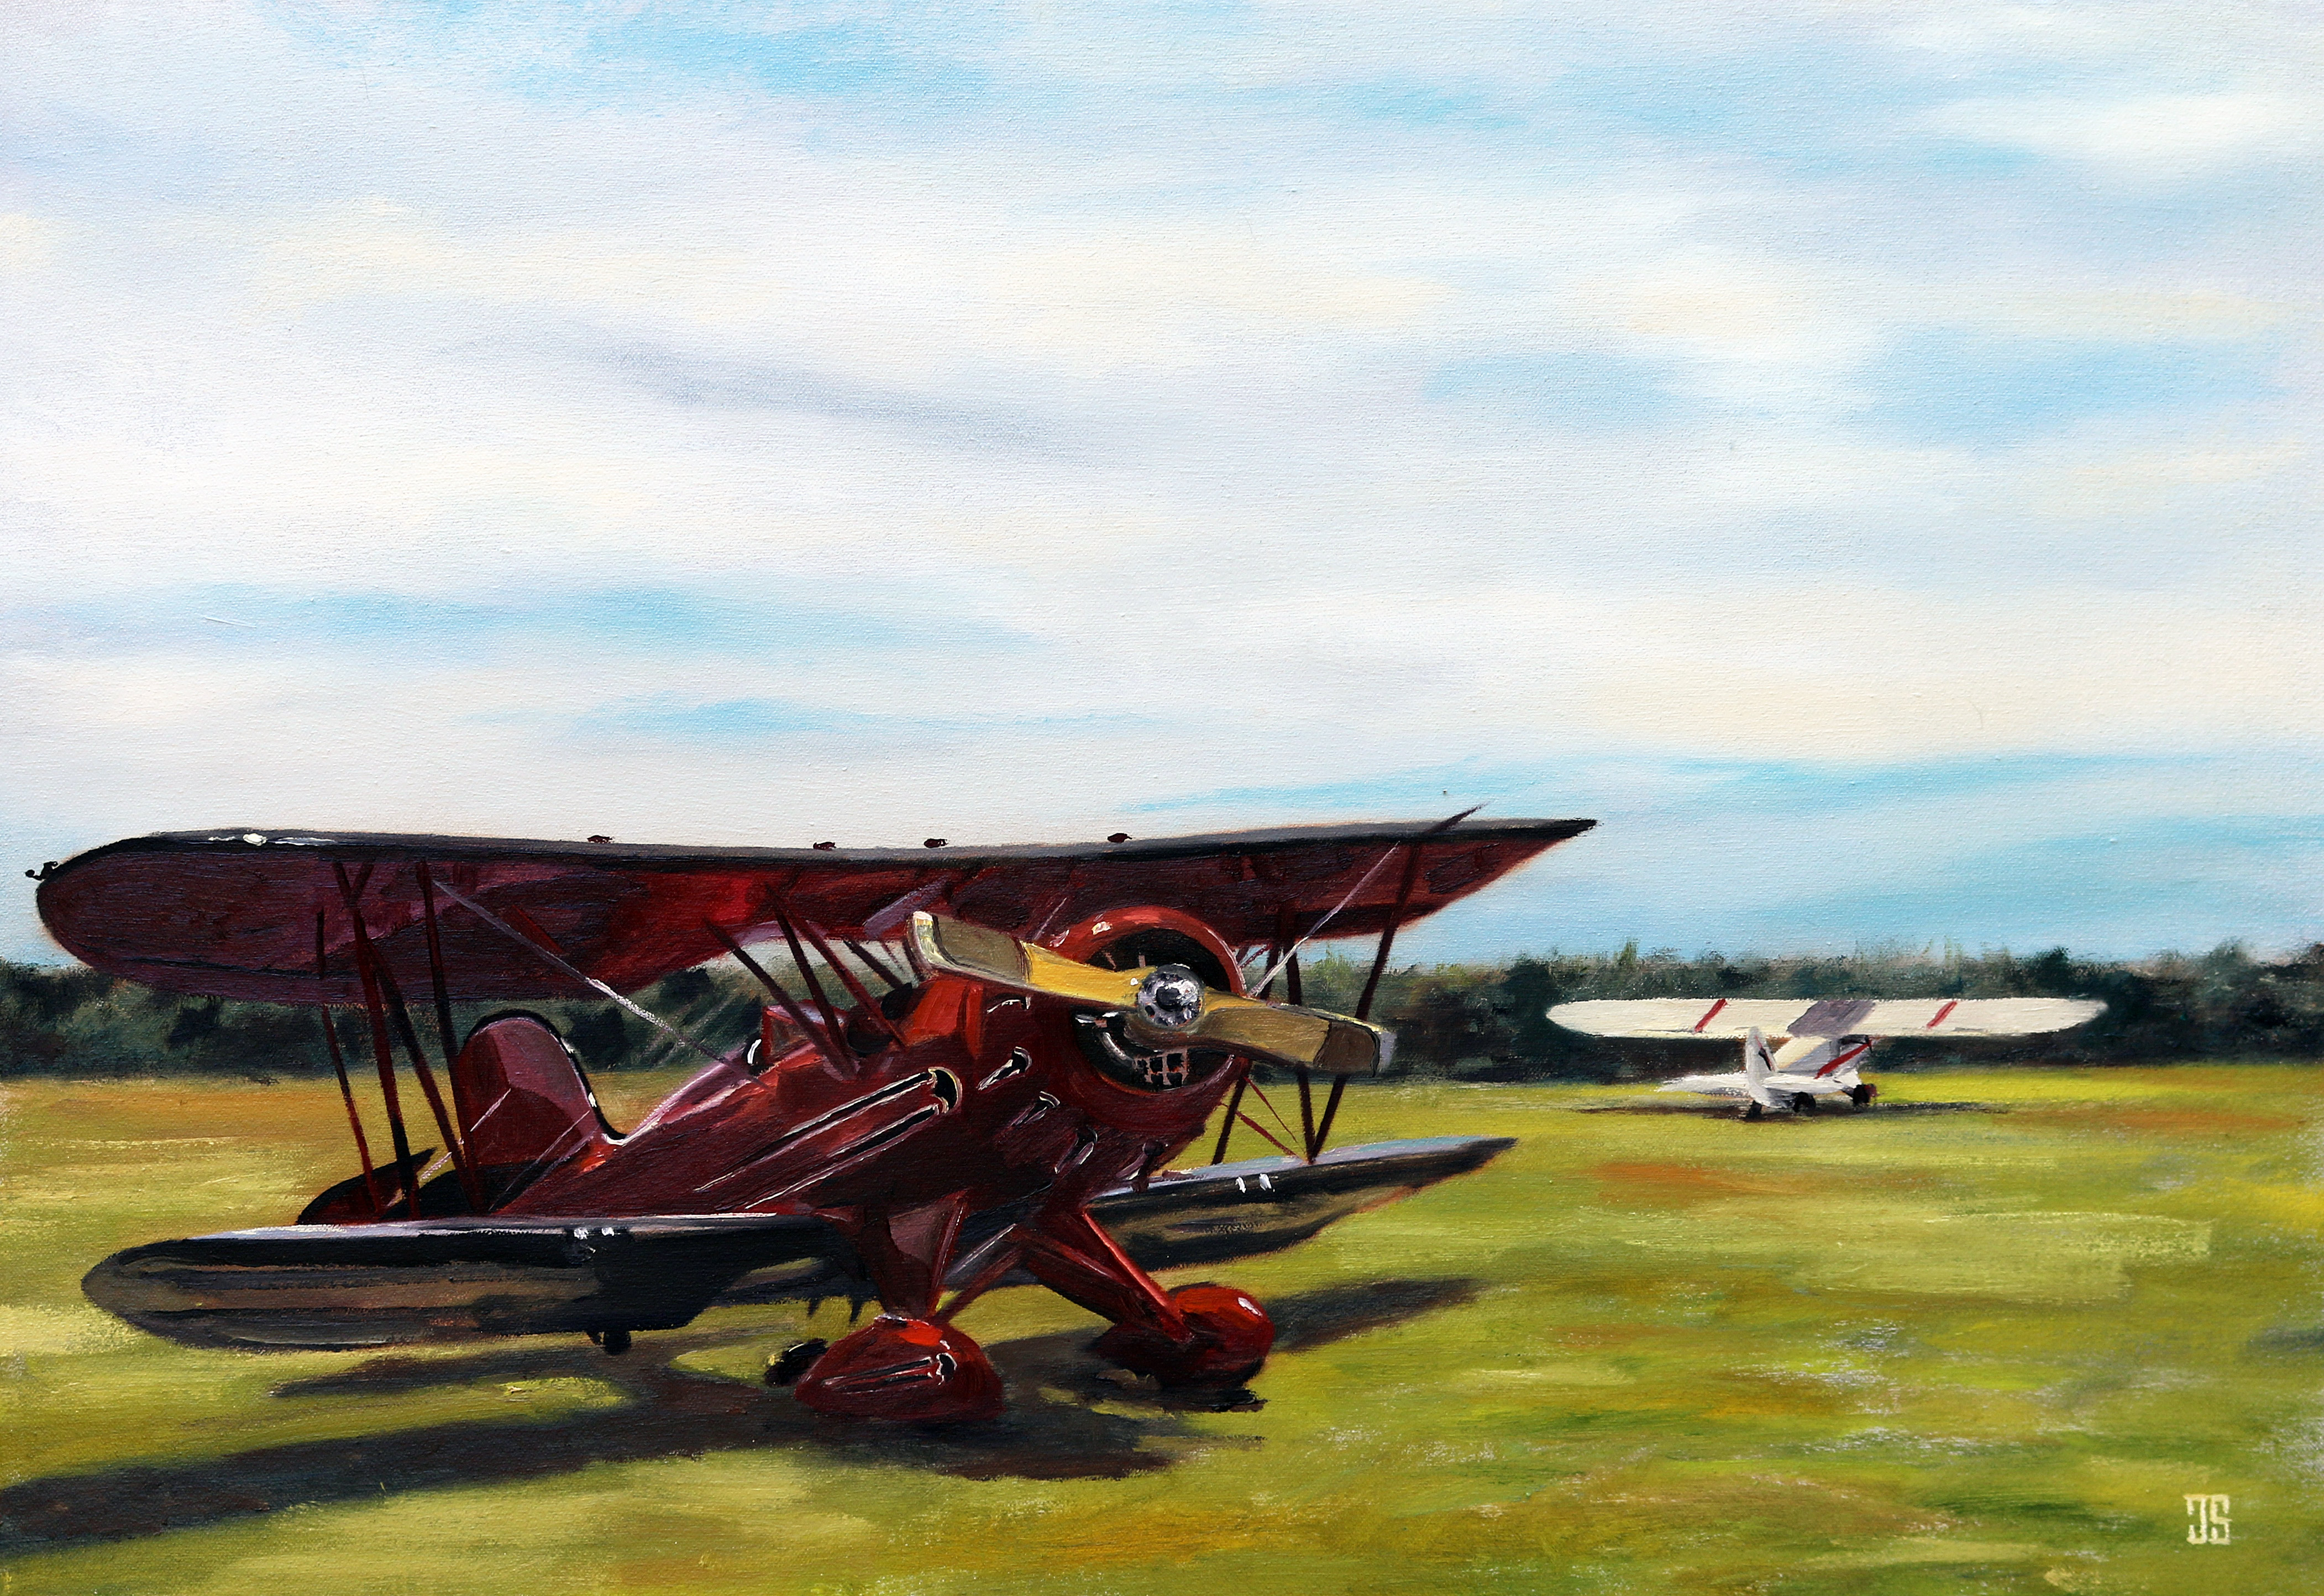 Oil painting "Cape Cod Airfield" by Jeffrey Dale Starr